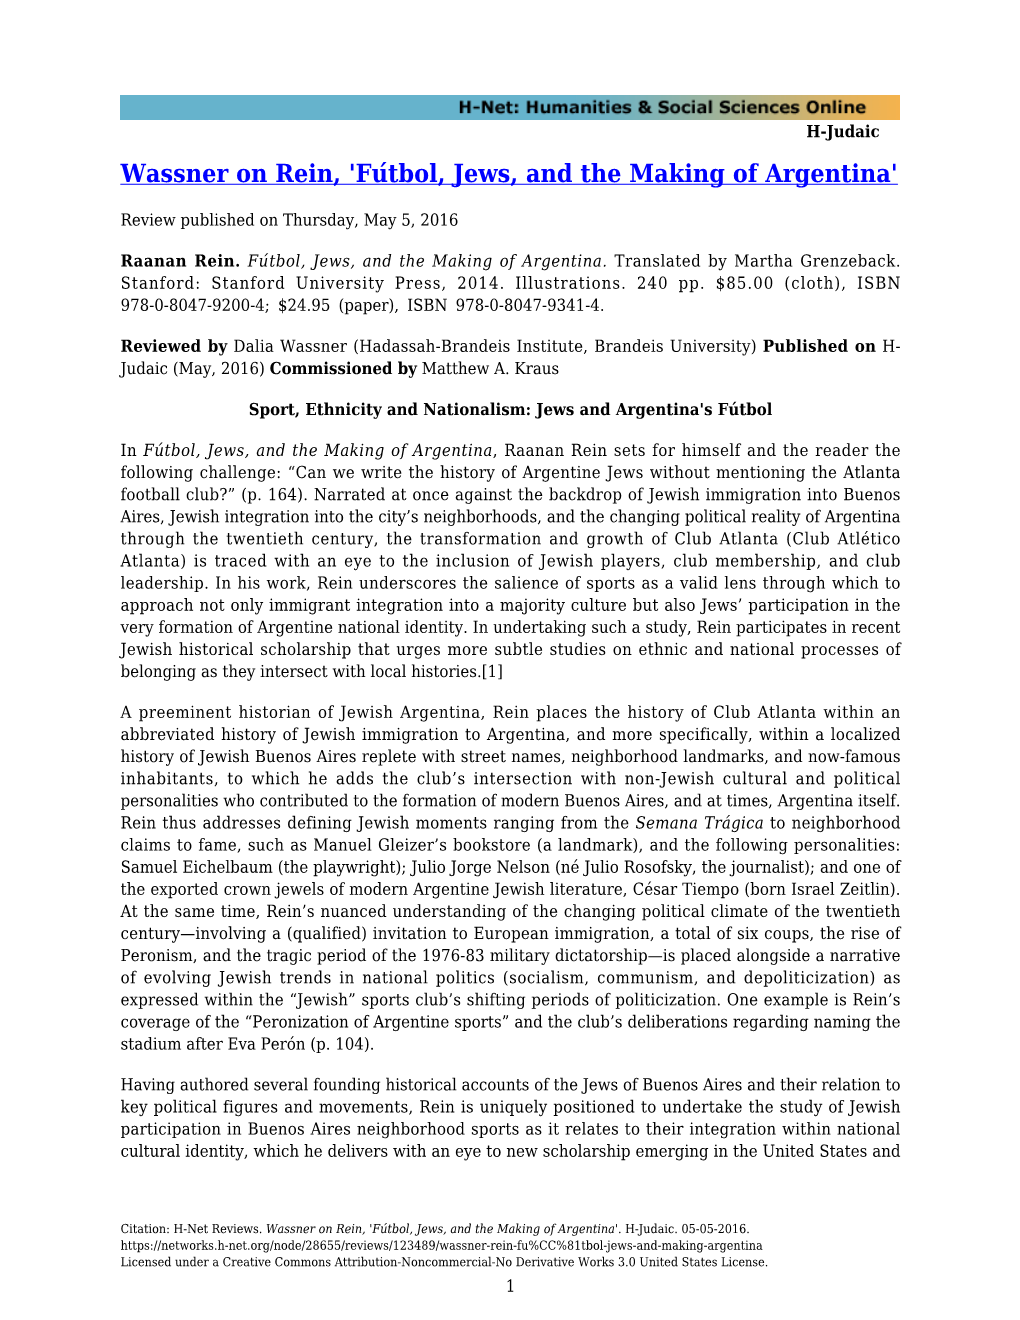 Fútbol, Jews, and the Making of Argentina